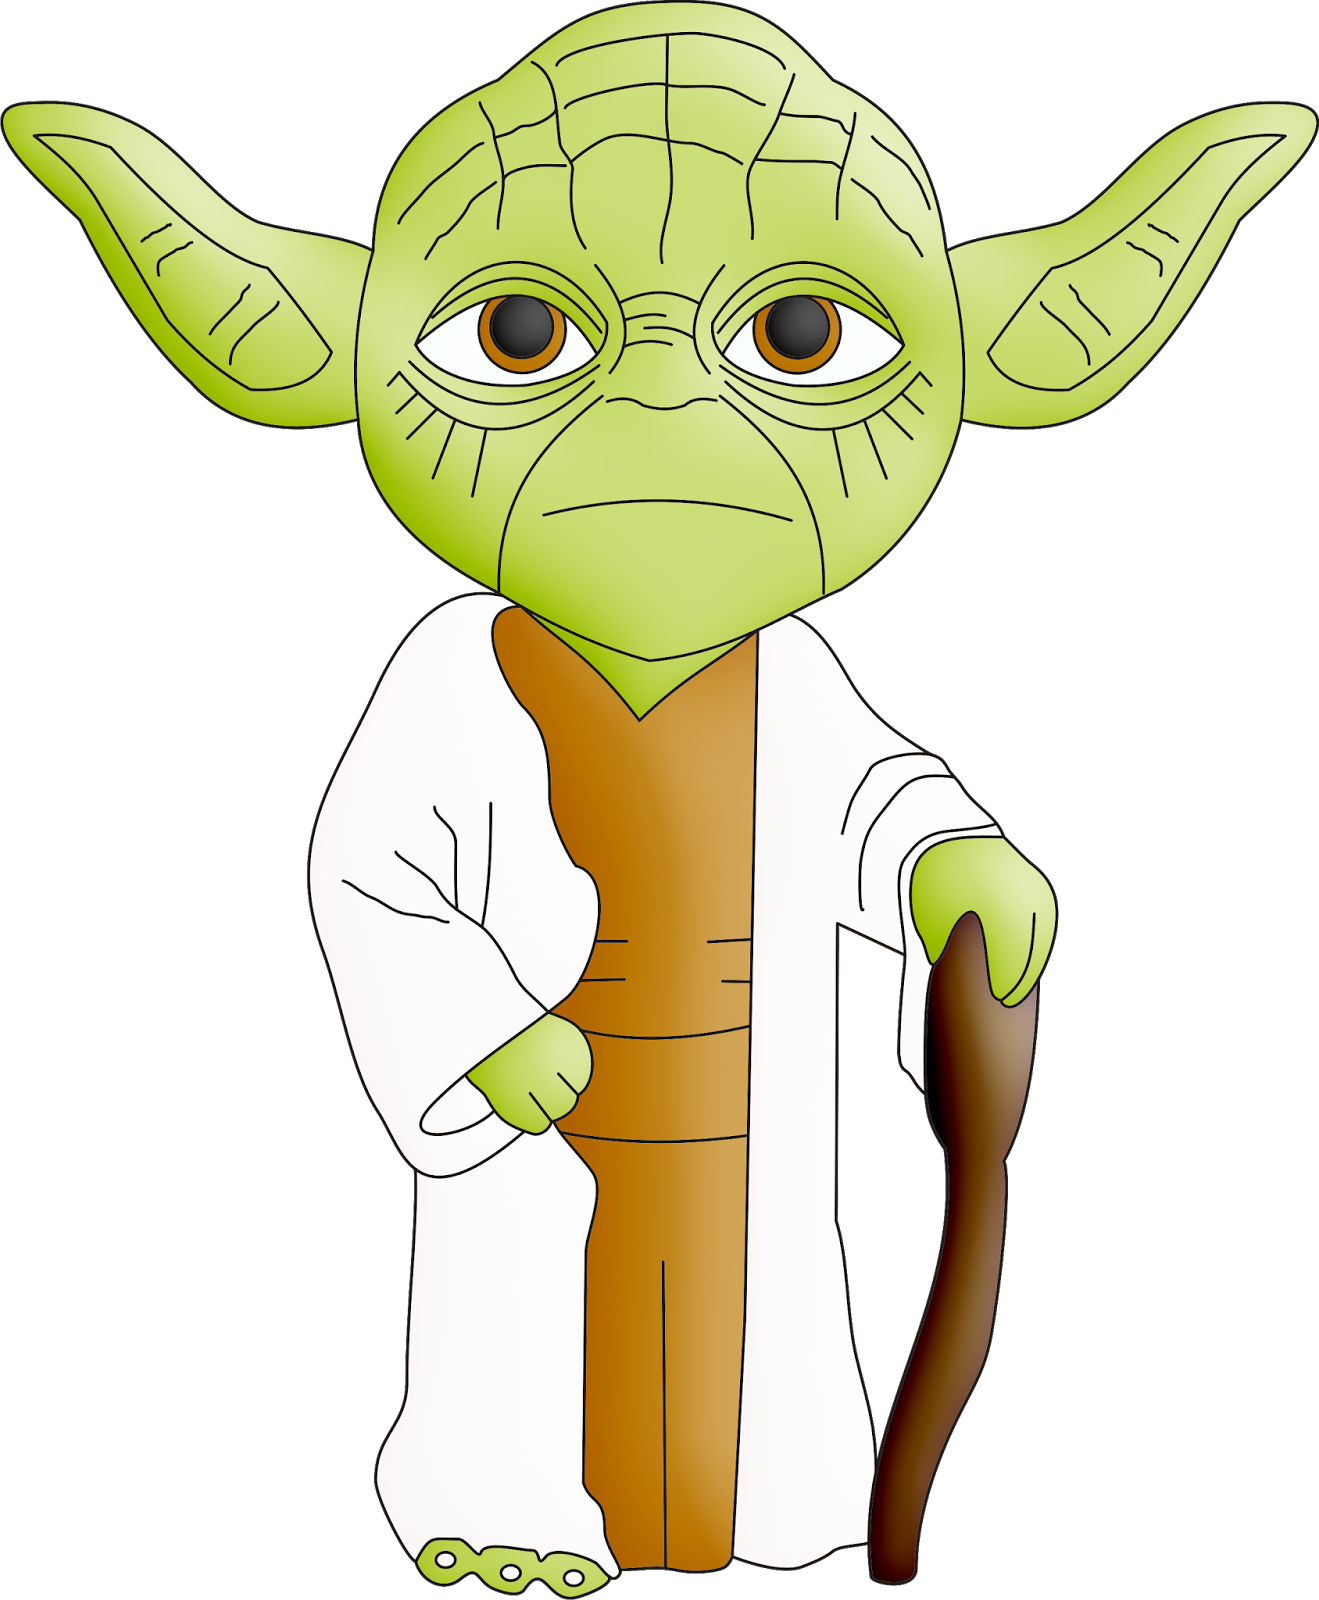 28  Collection of Yoda Clipart Images | High quality, free cliparts .